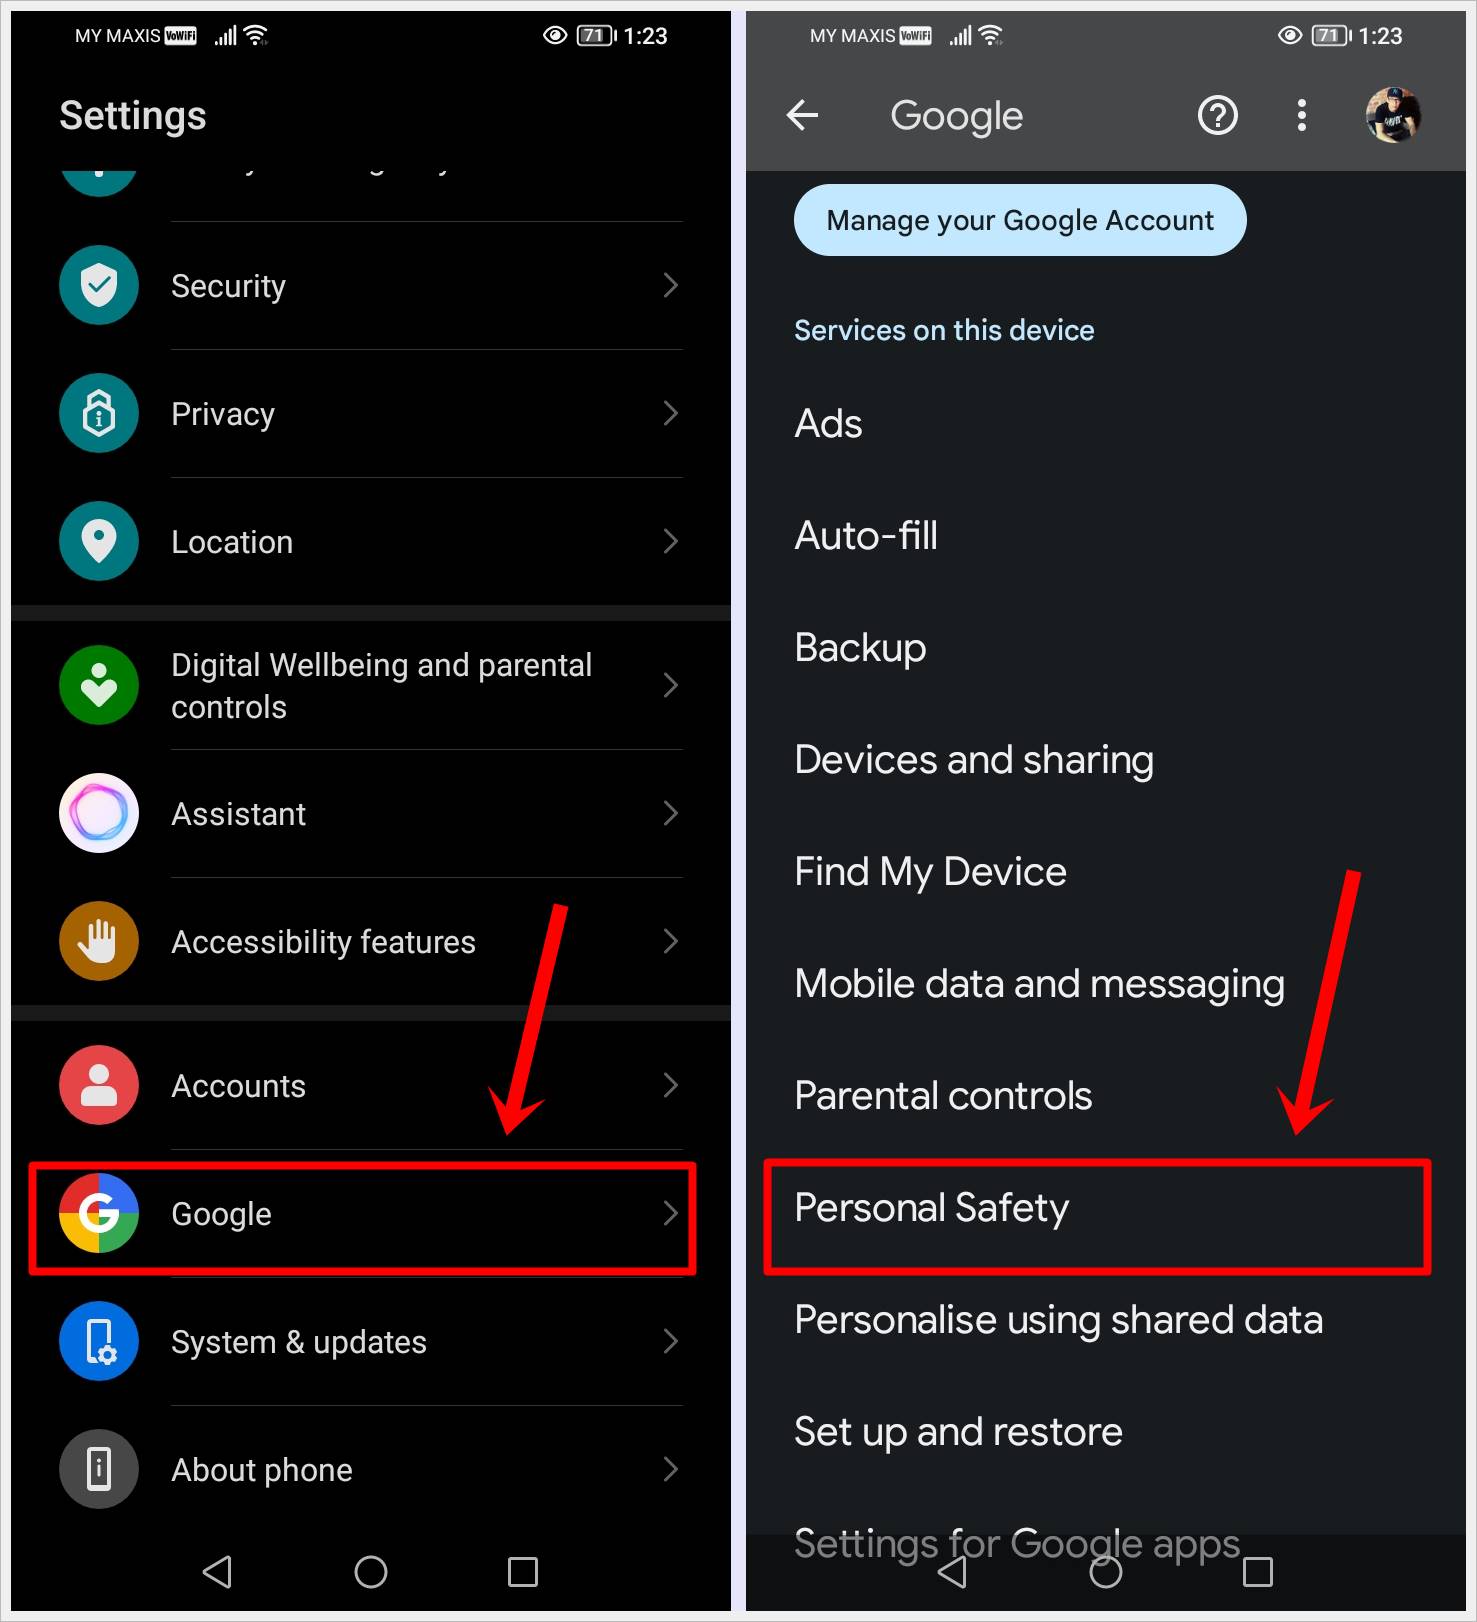 This image shows two screenshots taken from an Android device, with the 'Google' and 'Personal Safety' options highlighted on each screenshot, respectively.